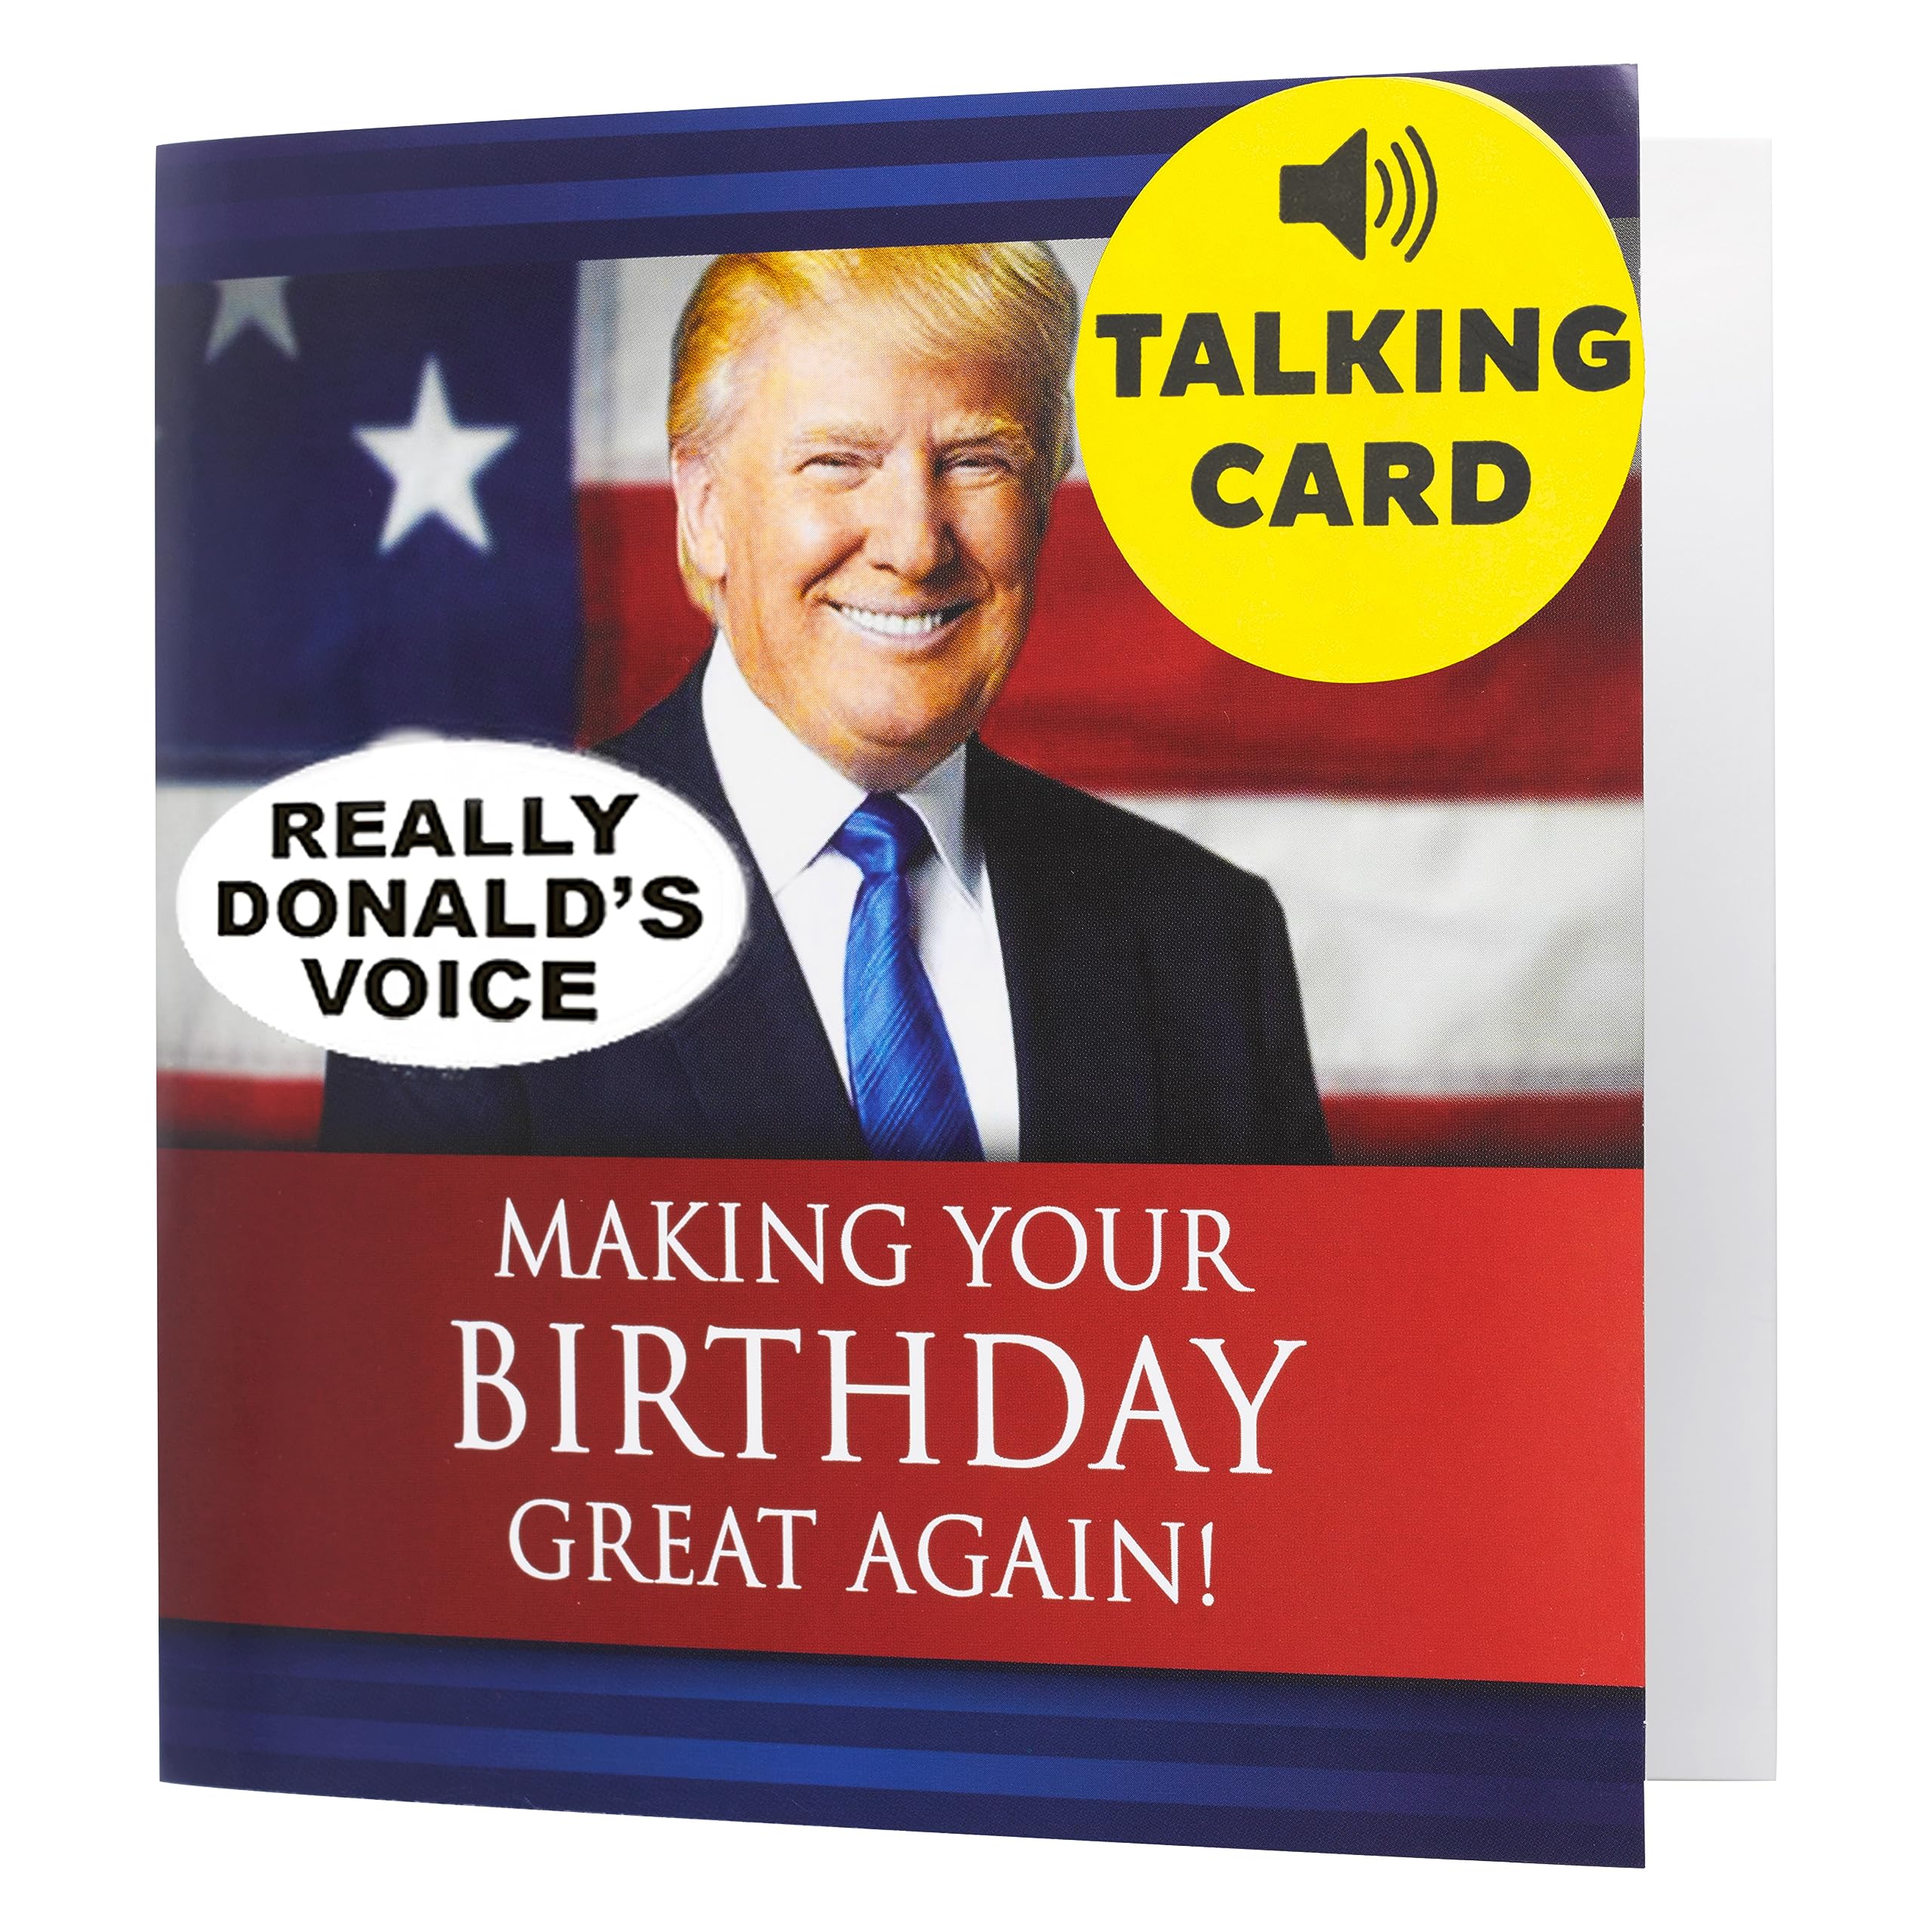 Talking Trump Birthday Card w/Trump's REAL Voice (Red) - The Best Donald Trump Gifts for Men Created, Funny Birthday Cards for Women, Birthday Gift for Husband, Unique Trump Birthday Cards for Men